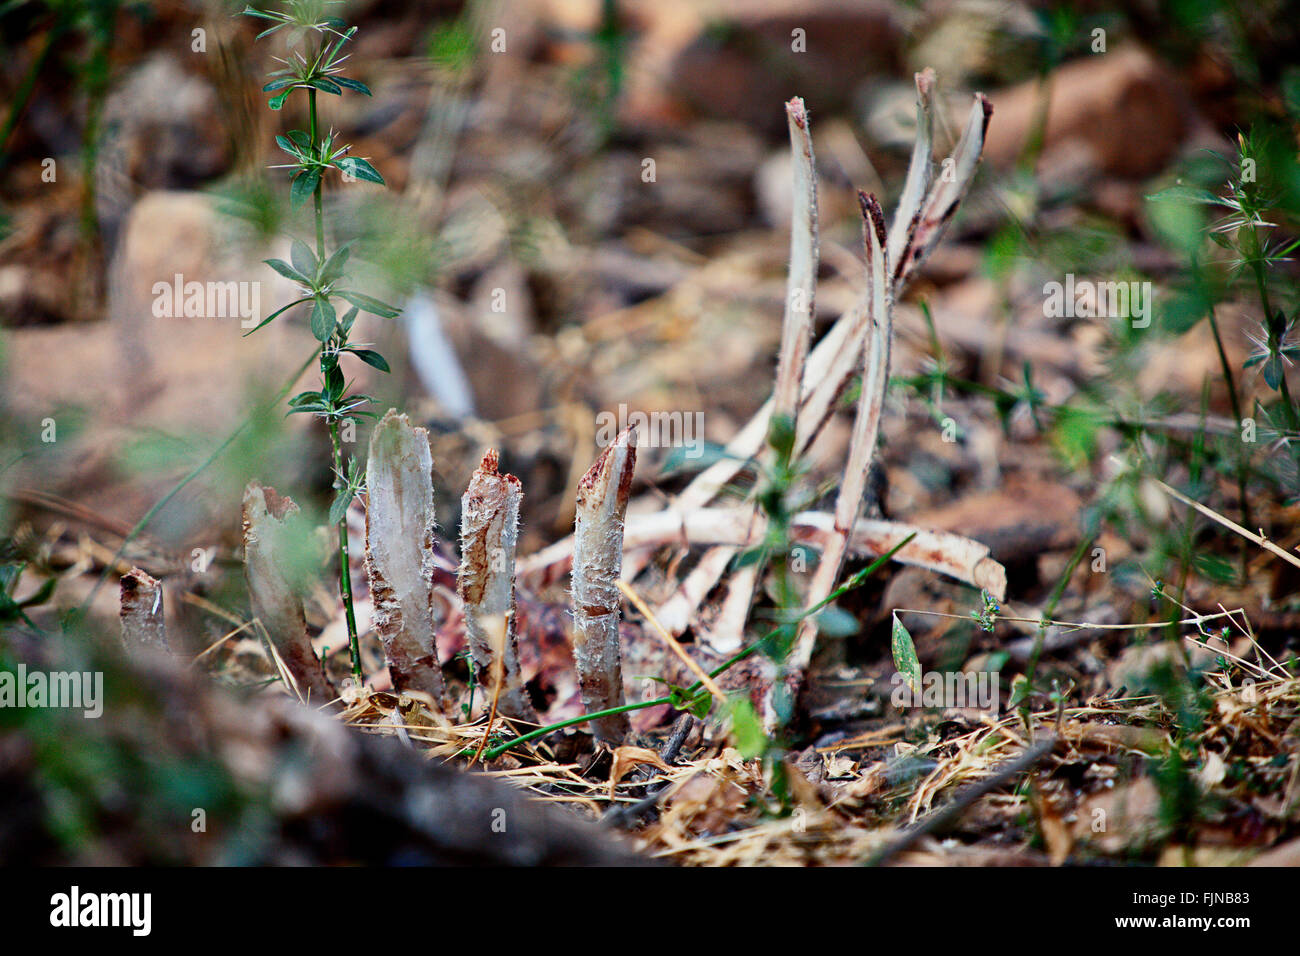 Rib cage (bones) of a deer that tiger has eaten. Ranthambore National Park, India Stock Photo